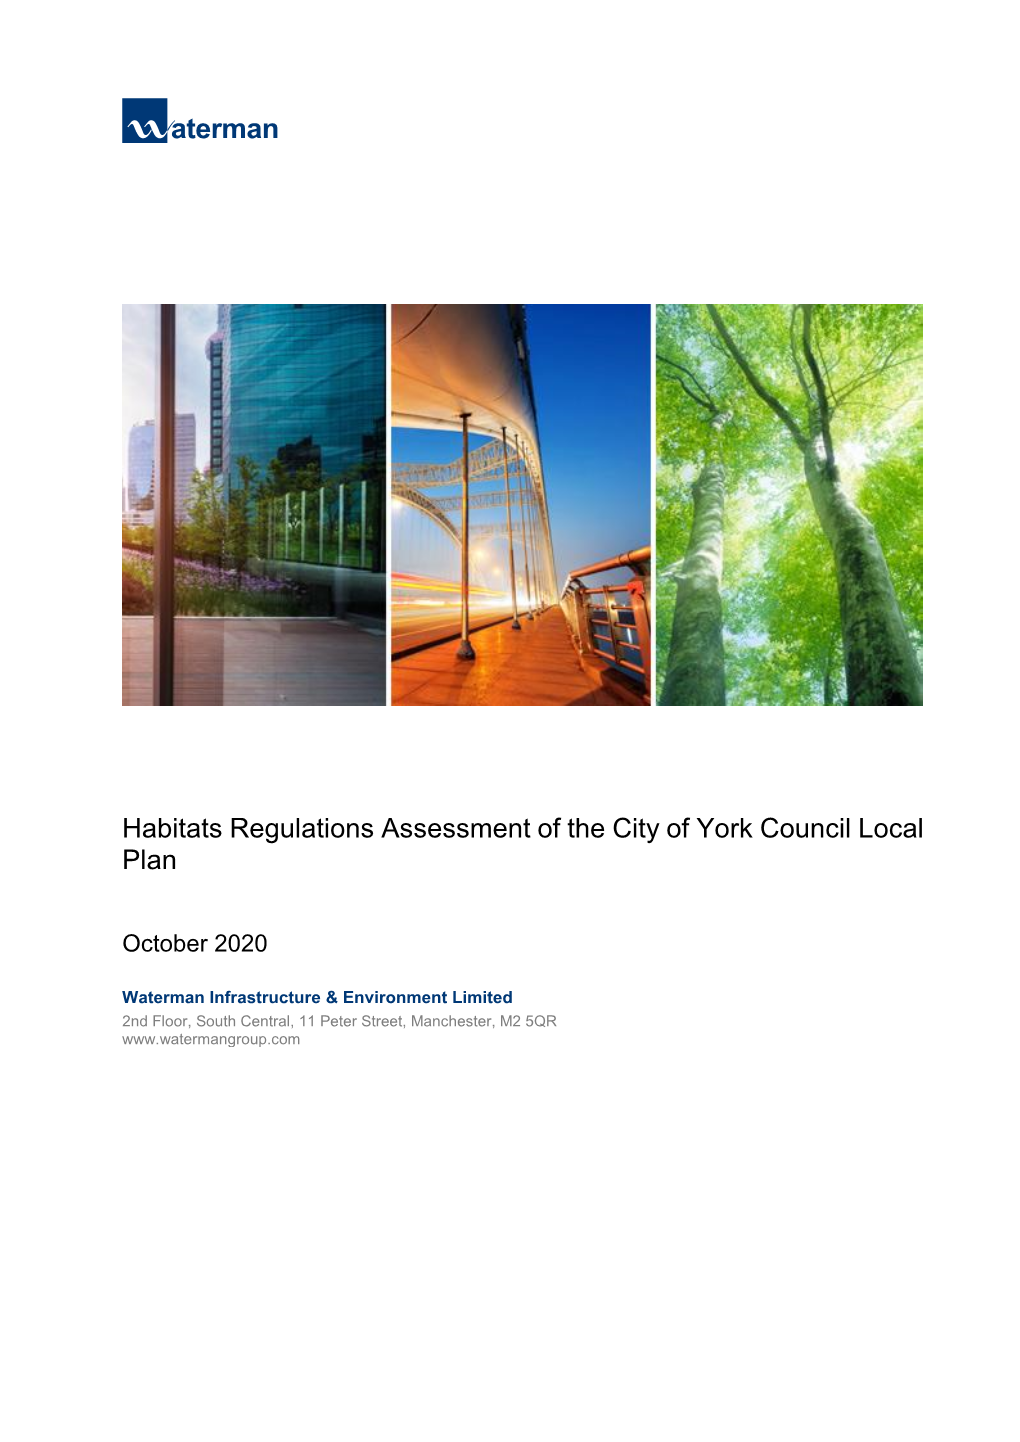 Habitats Regulations Assessment of the City of York Council Local Plan